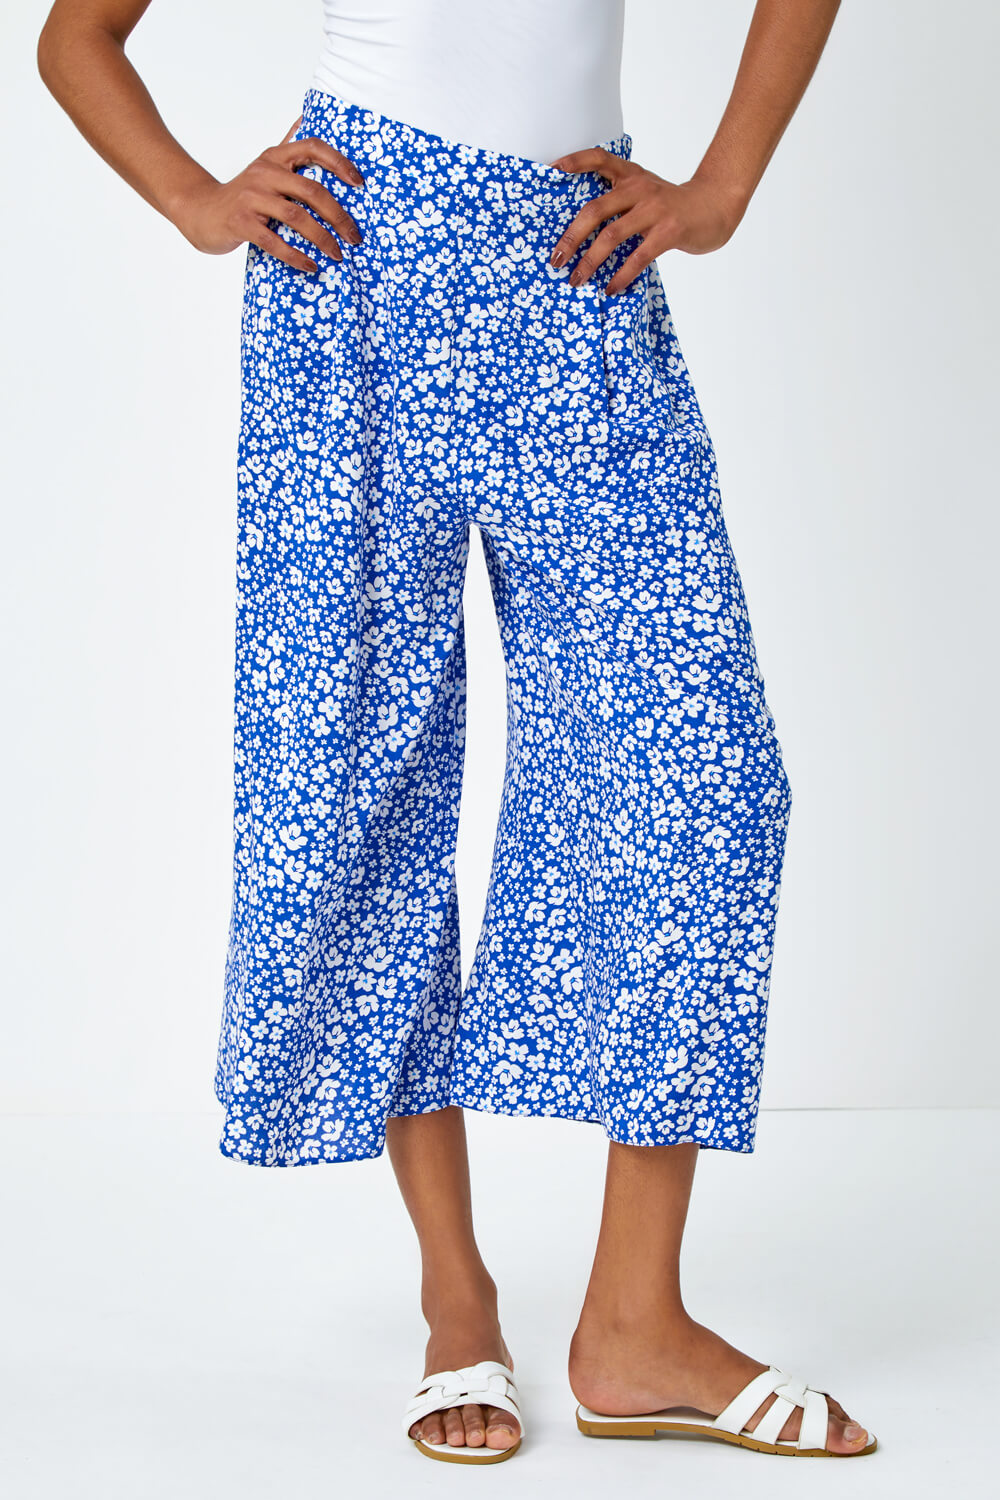 Blue Ditsy Floral Print Culotte Trousers, Image 4 of 5